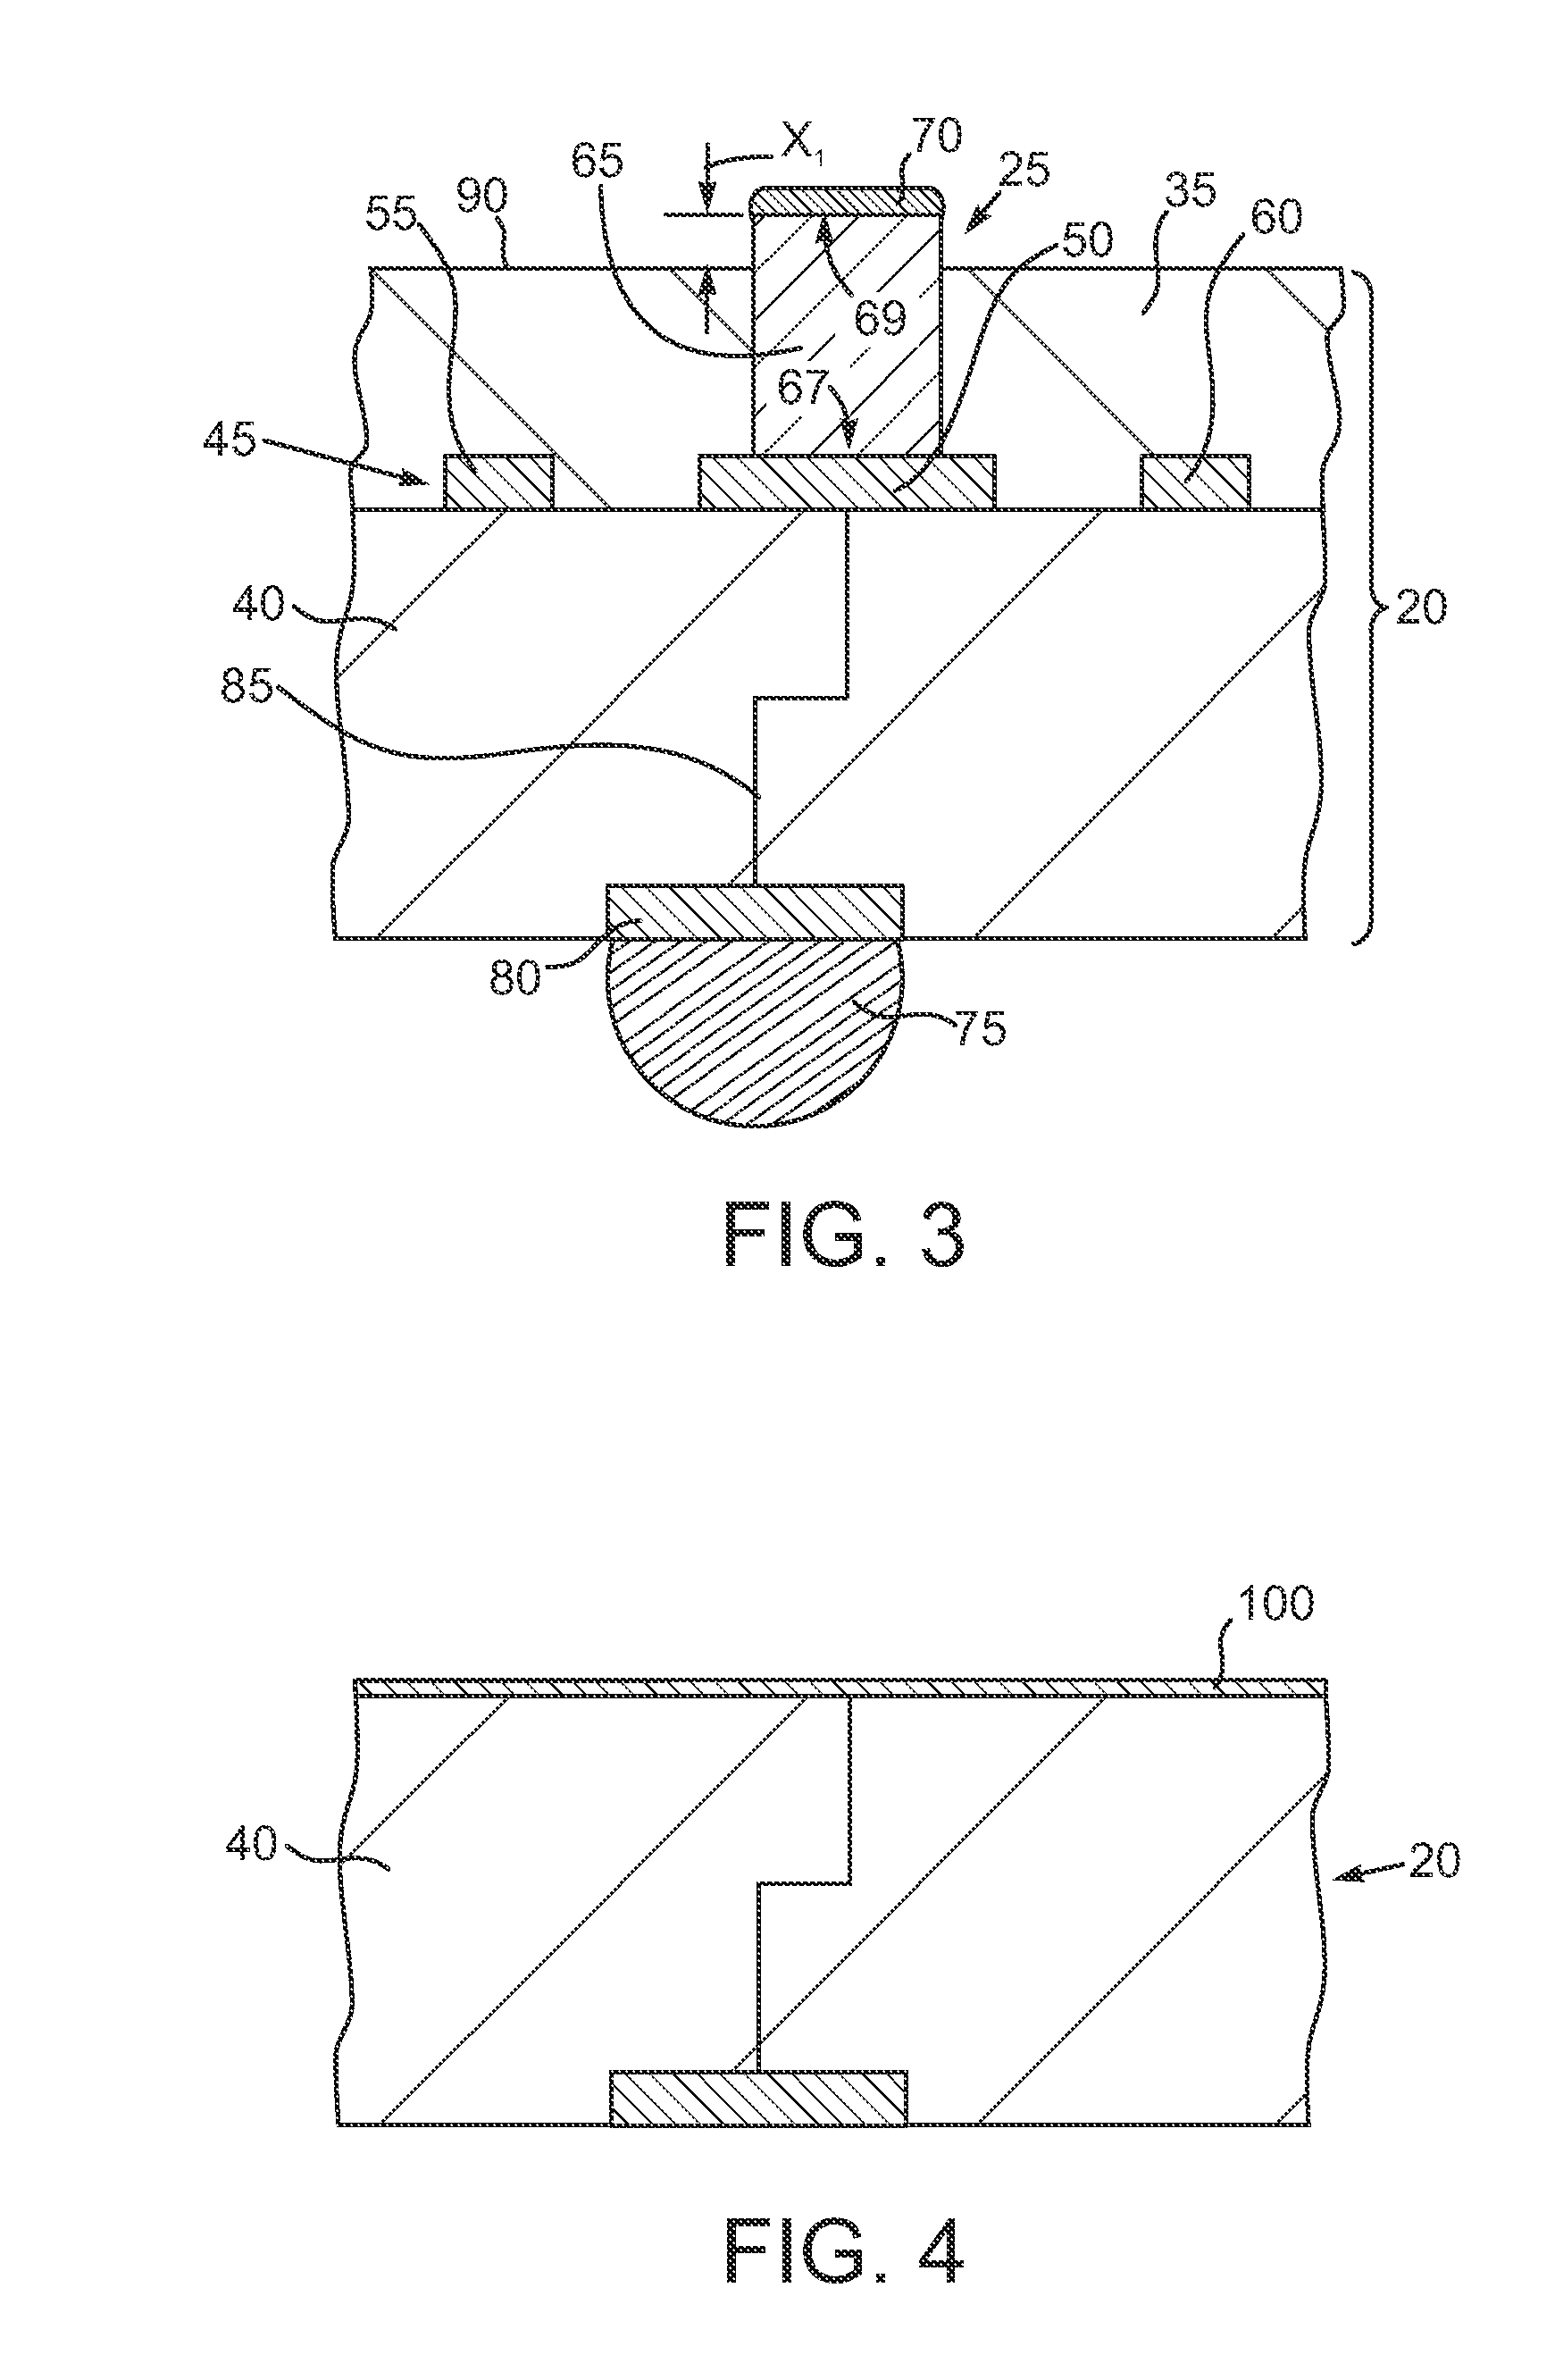 Circuit board with conductor post structure